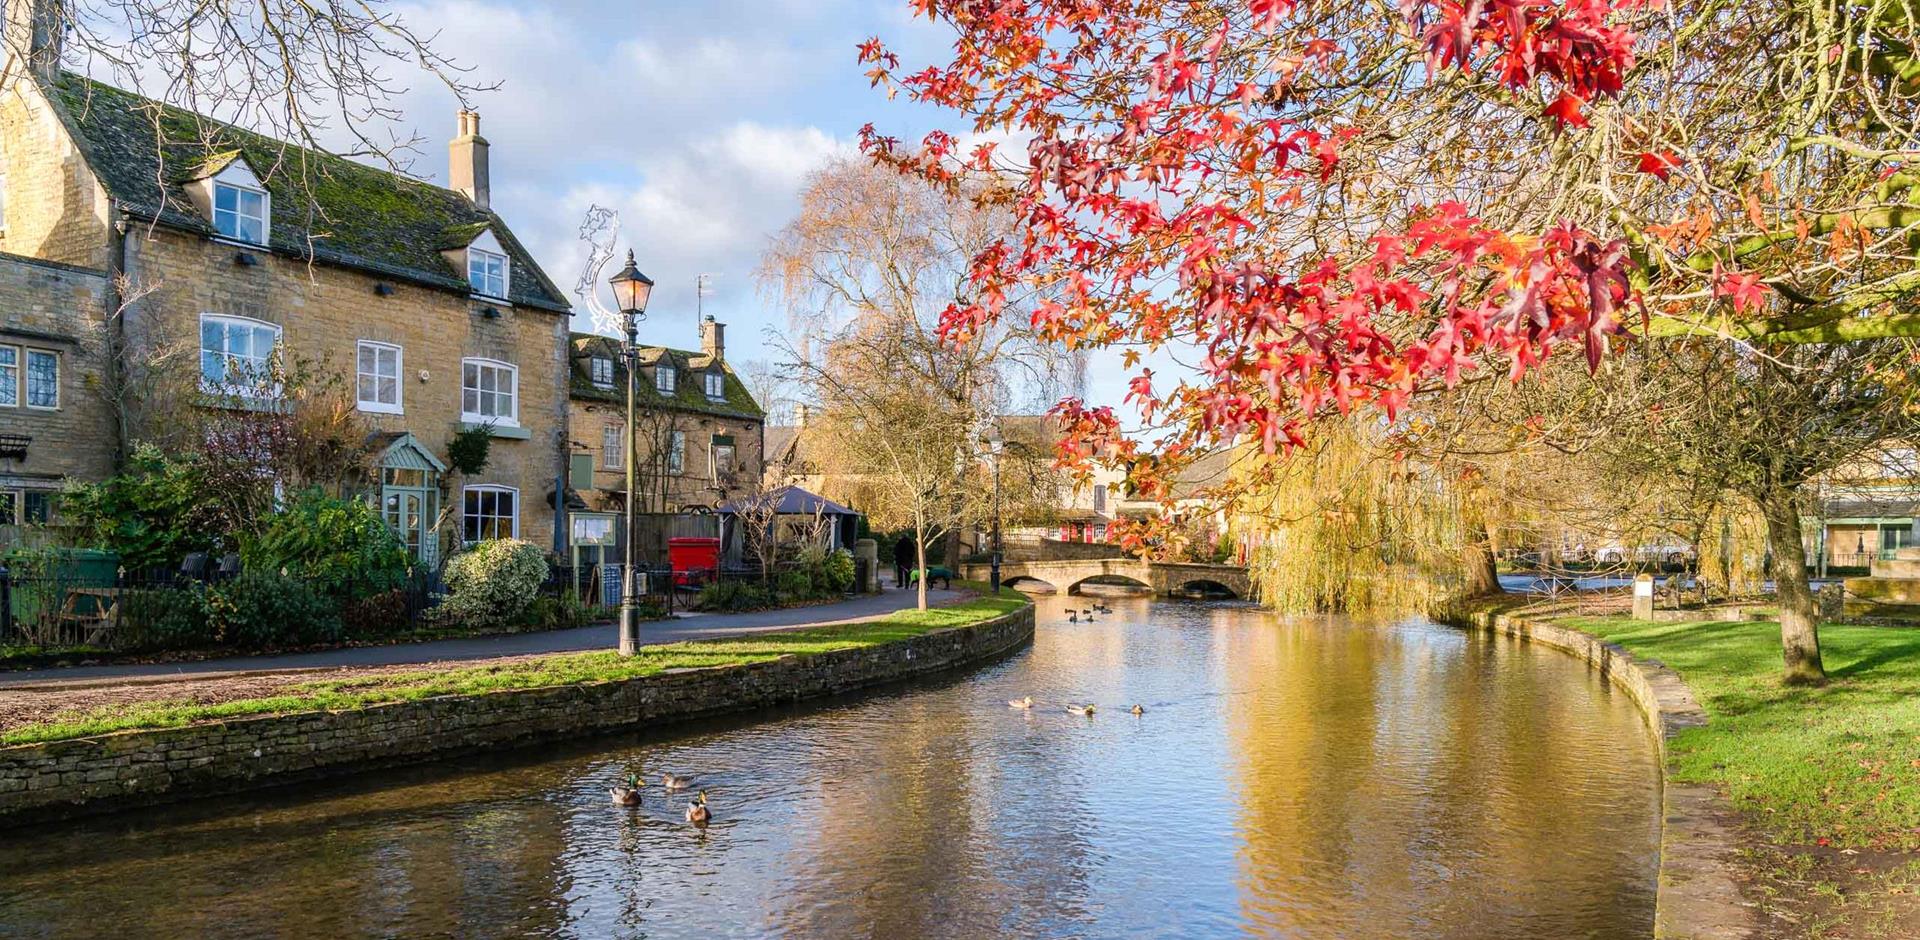 Bourton-on-the-Water, UK, A&K